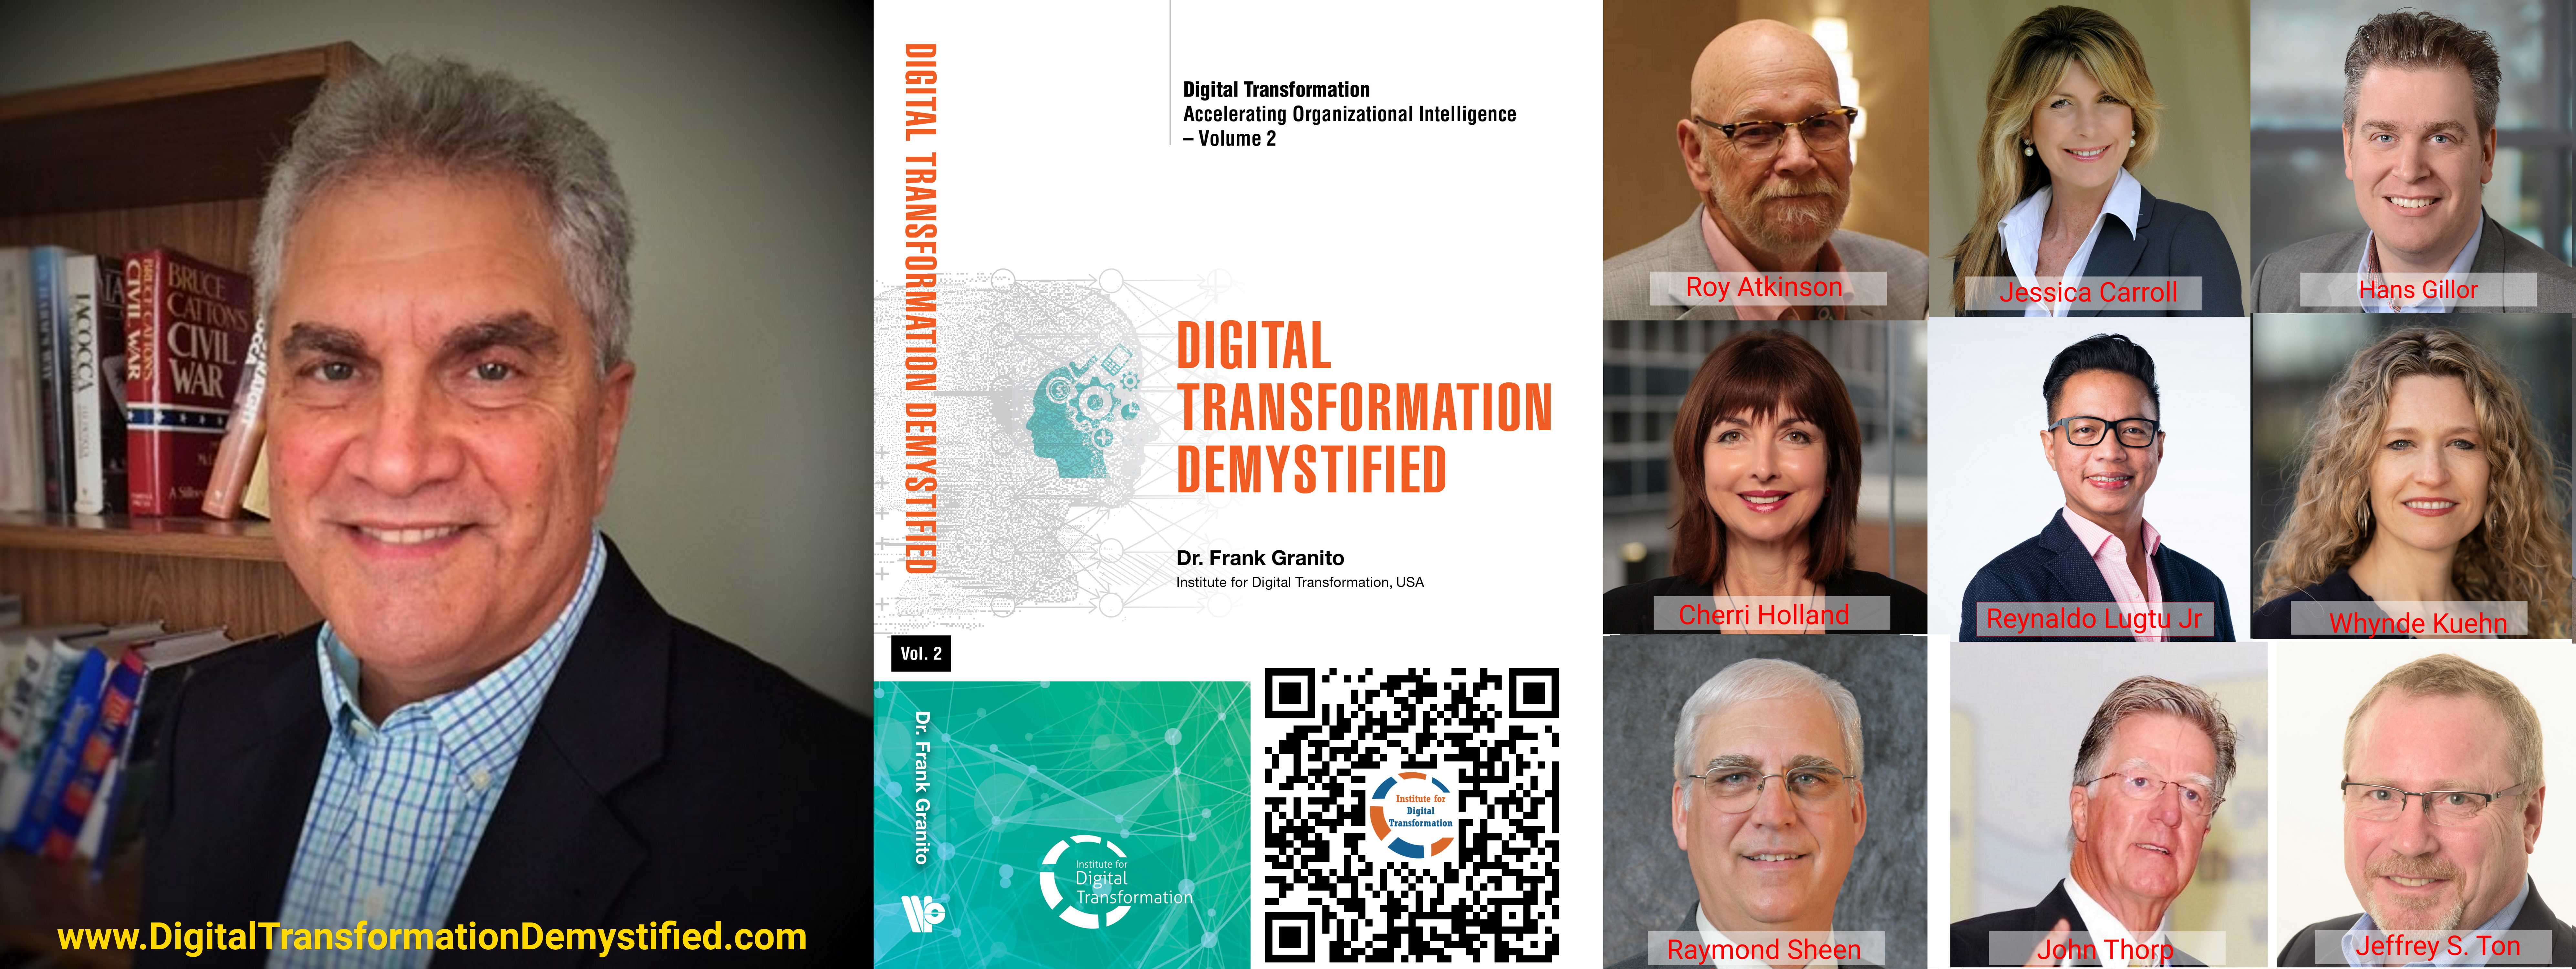 Digital Transformation Demystified and its Authors